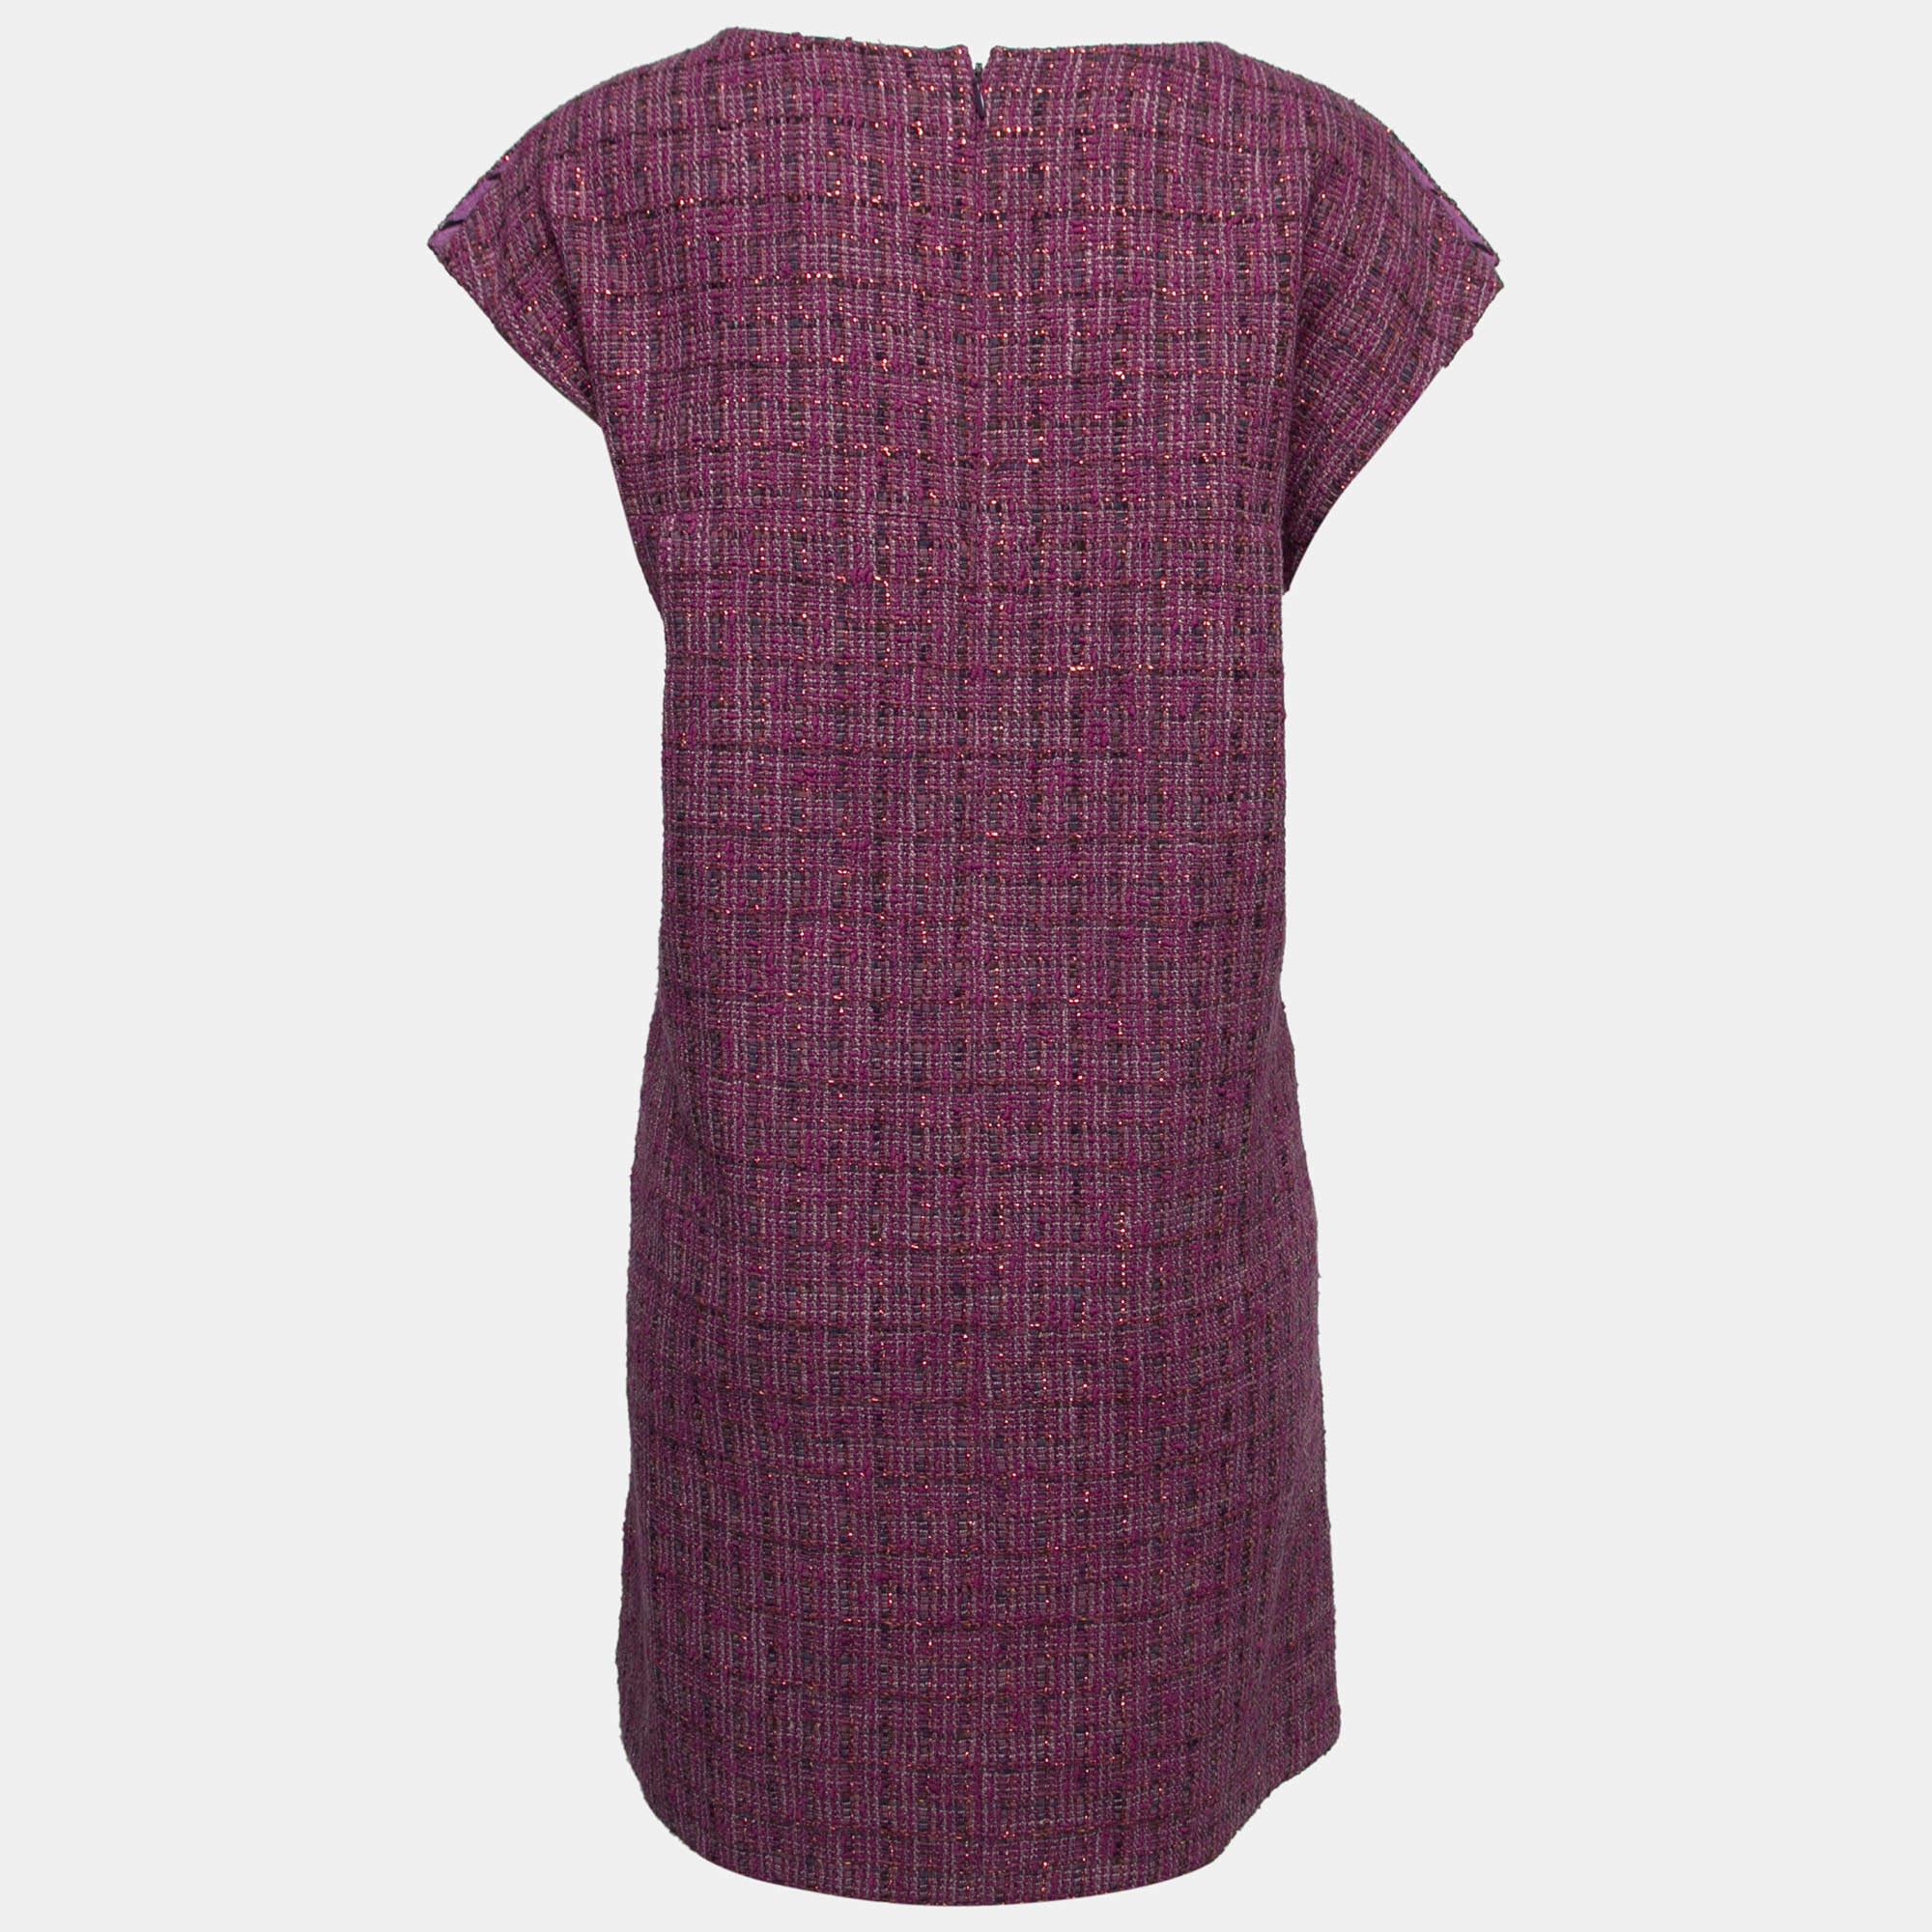 The fine artistry and the feminine silhouette of this Chanel tweed dress exhibit the label's impeccable craftsmanship in tailoring. It is stitched using quality materials, has a good fit, and can be easily styled with chic accessories, open-toe